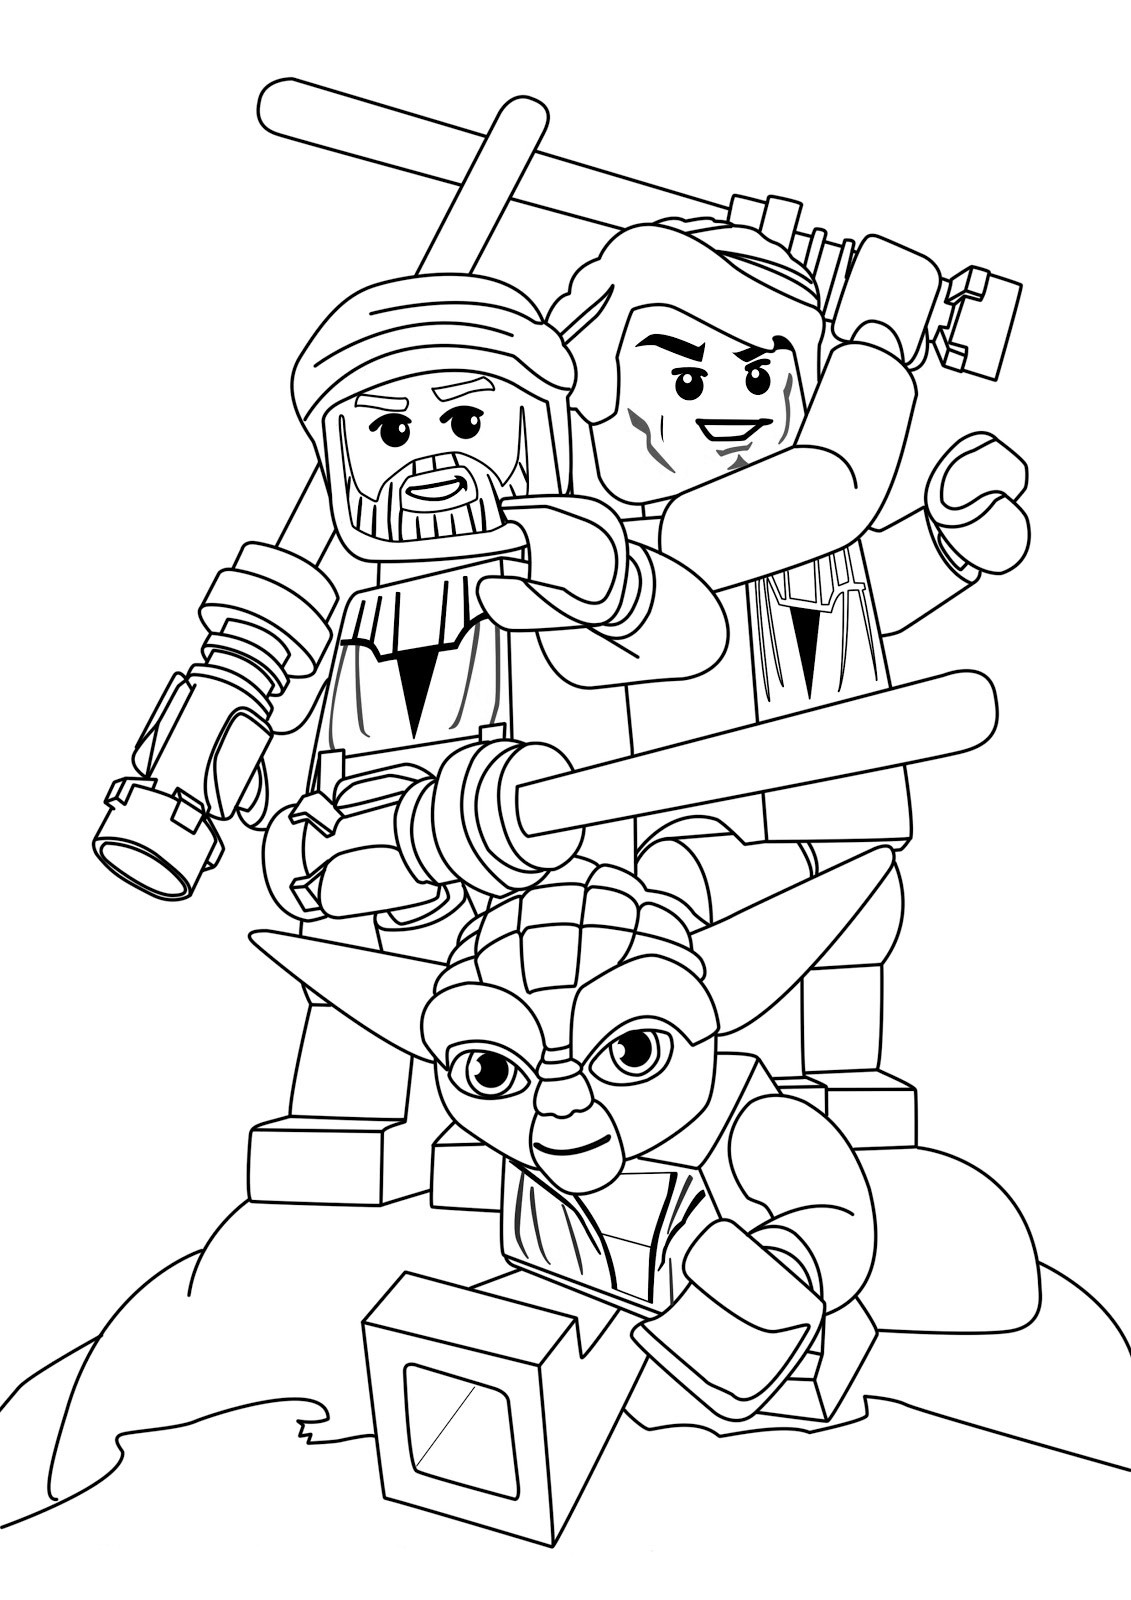 Star Wars Coloring Pages For Kids
 Lego Star Wars Coloring Pages Best Coloring Pages For Kids